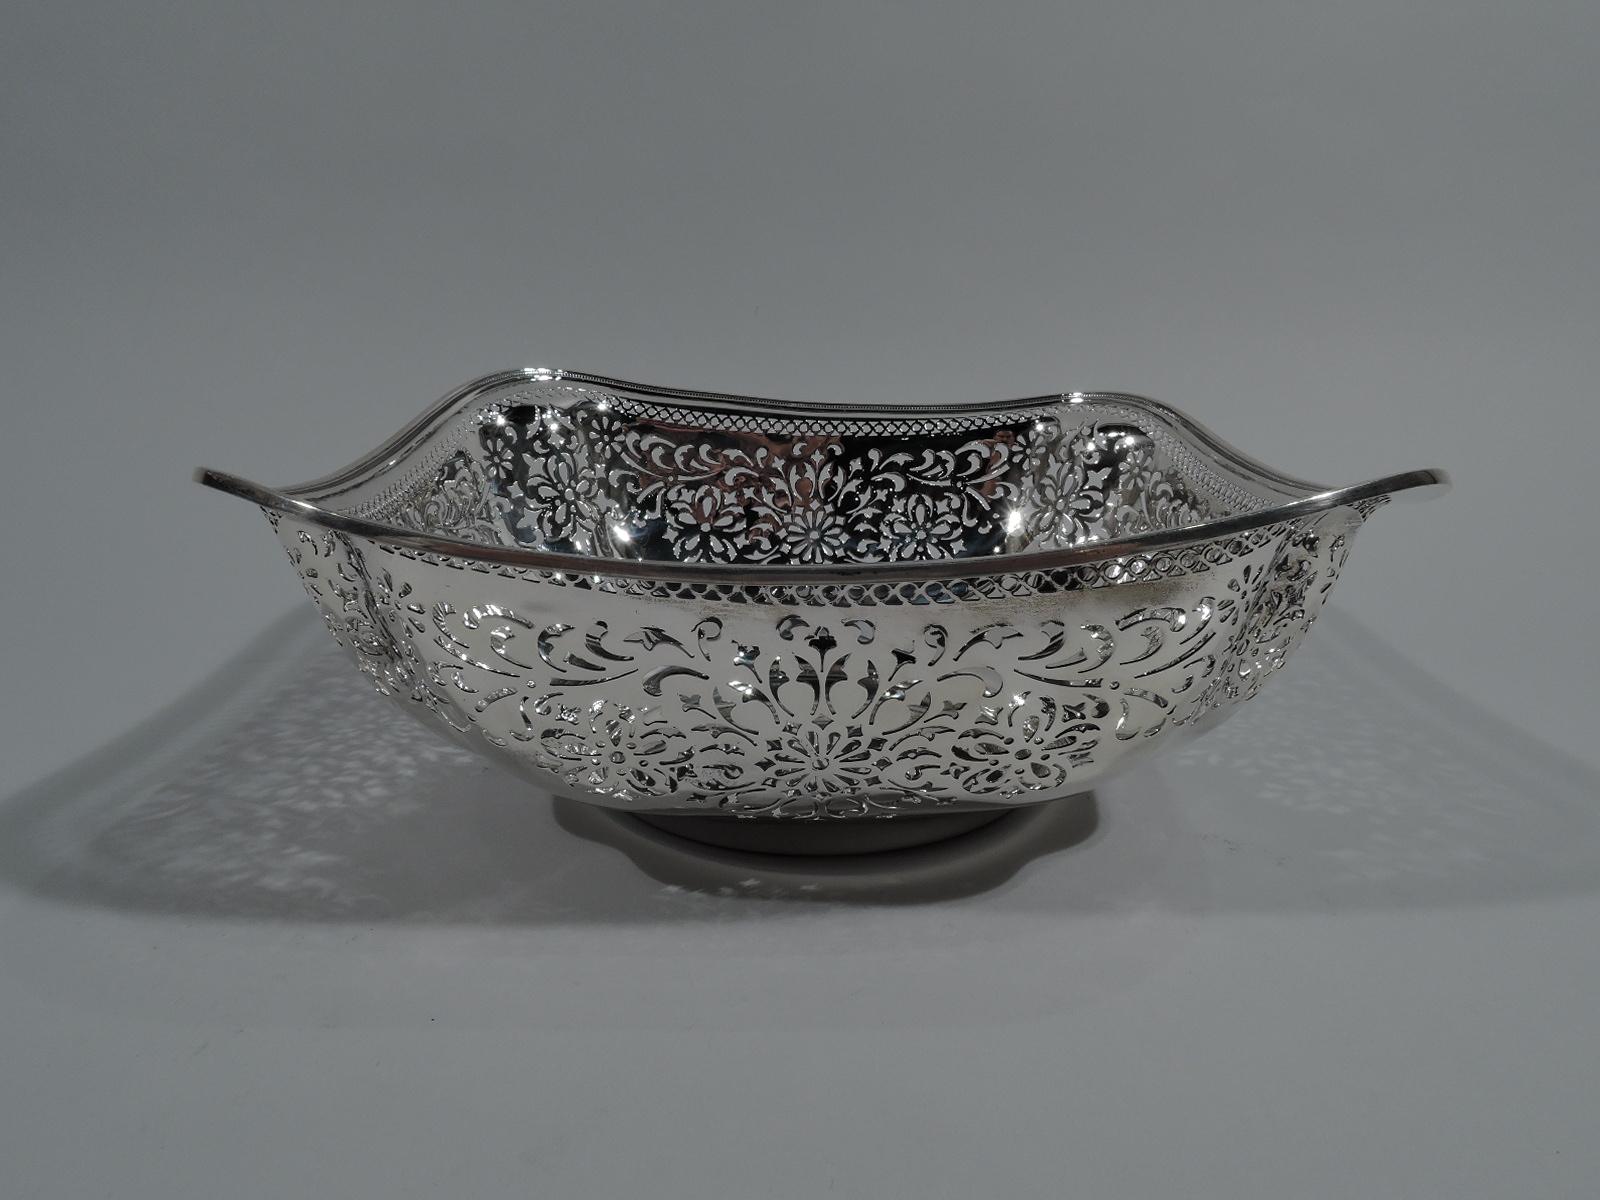 Edwardian sterling silver bowl. Made by Gorham in Providence in 1909. Squarish with circular well, curved sides, wavy rim, and concave corners. Sides have pierced and stylized flowers and leaves, and guilloche border. Hallmark incudes date symbol